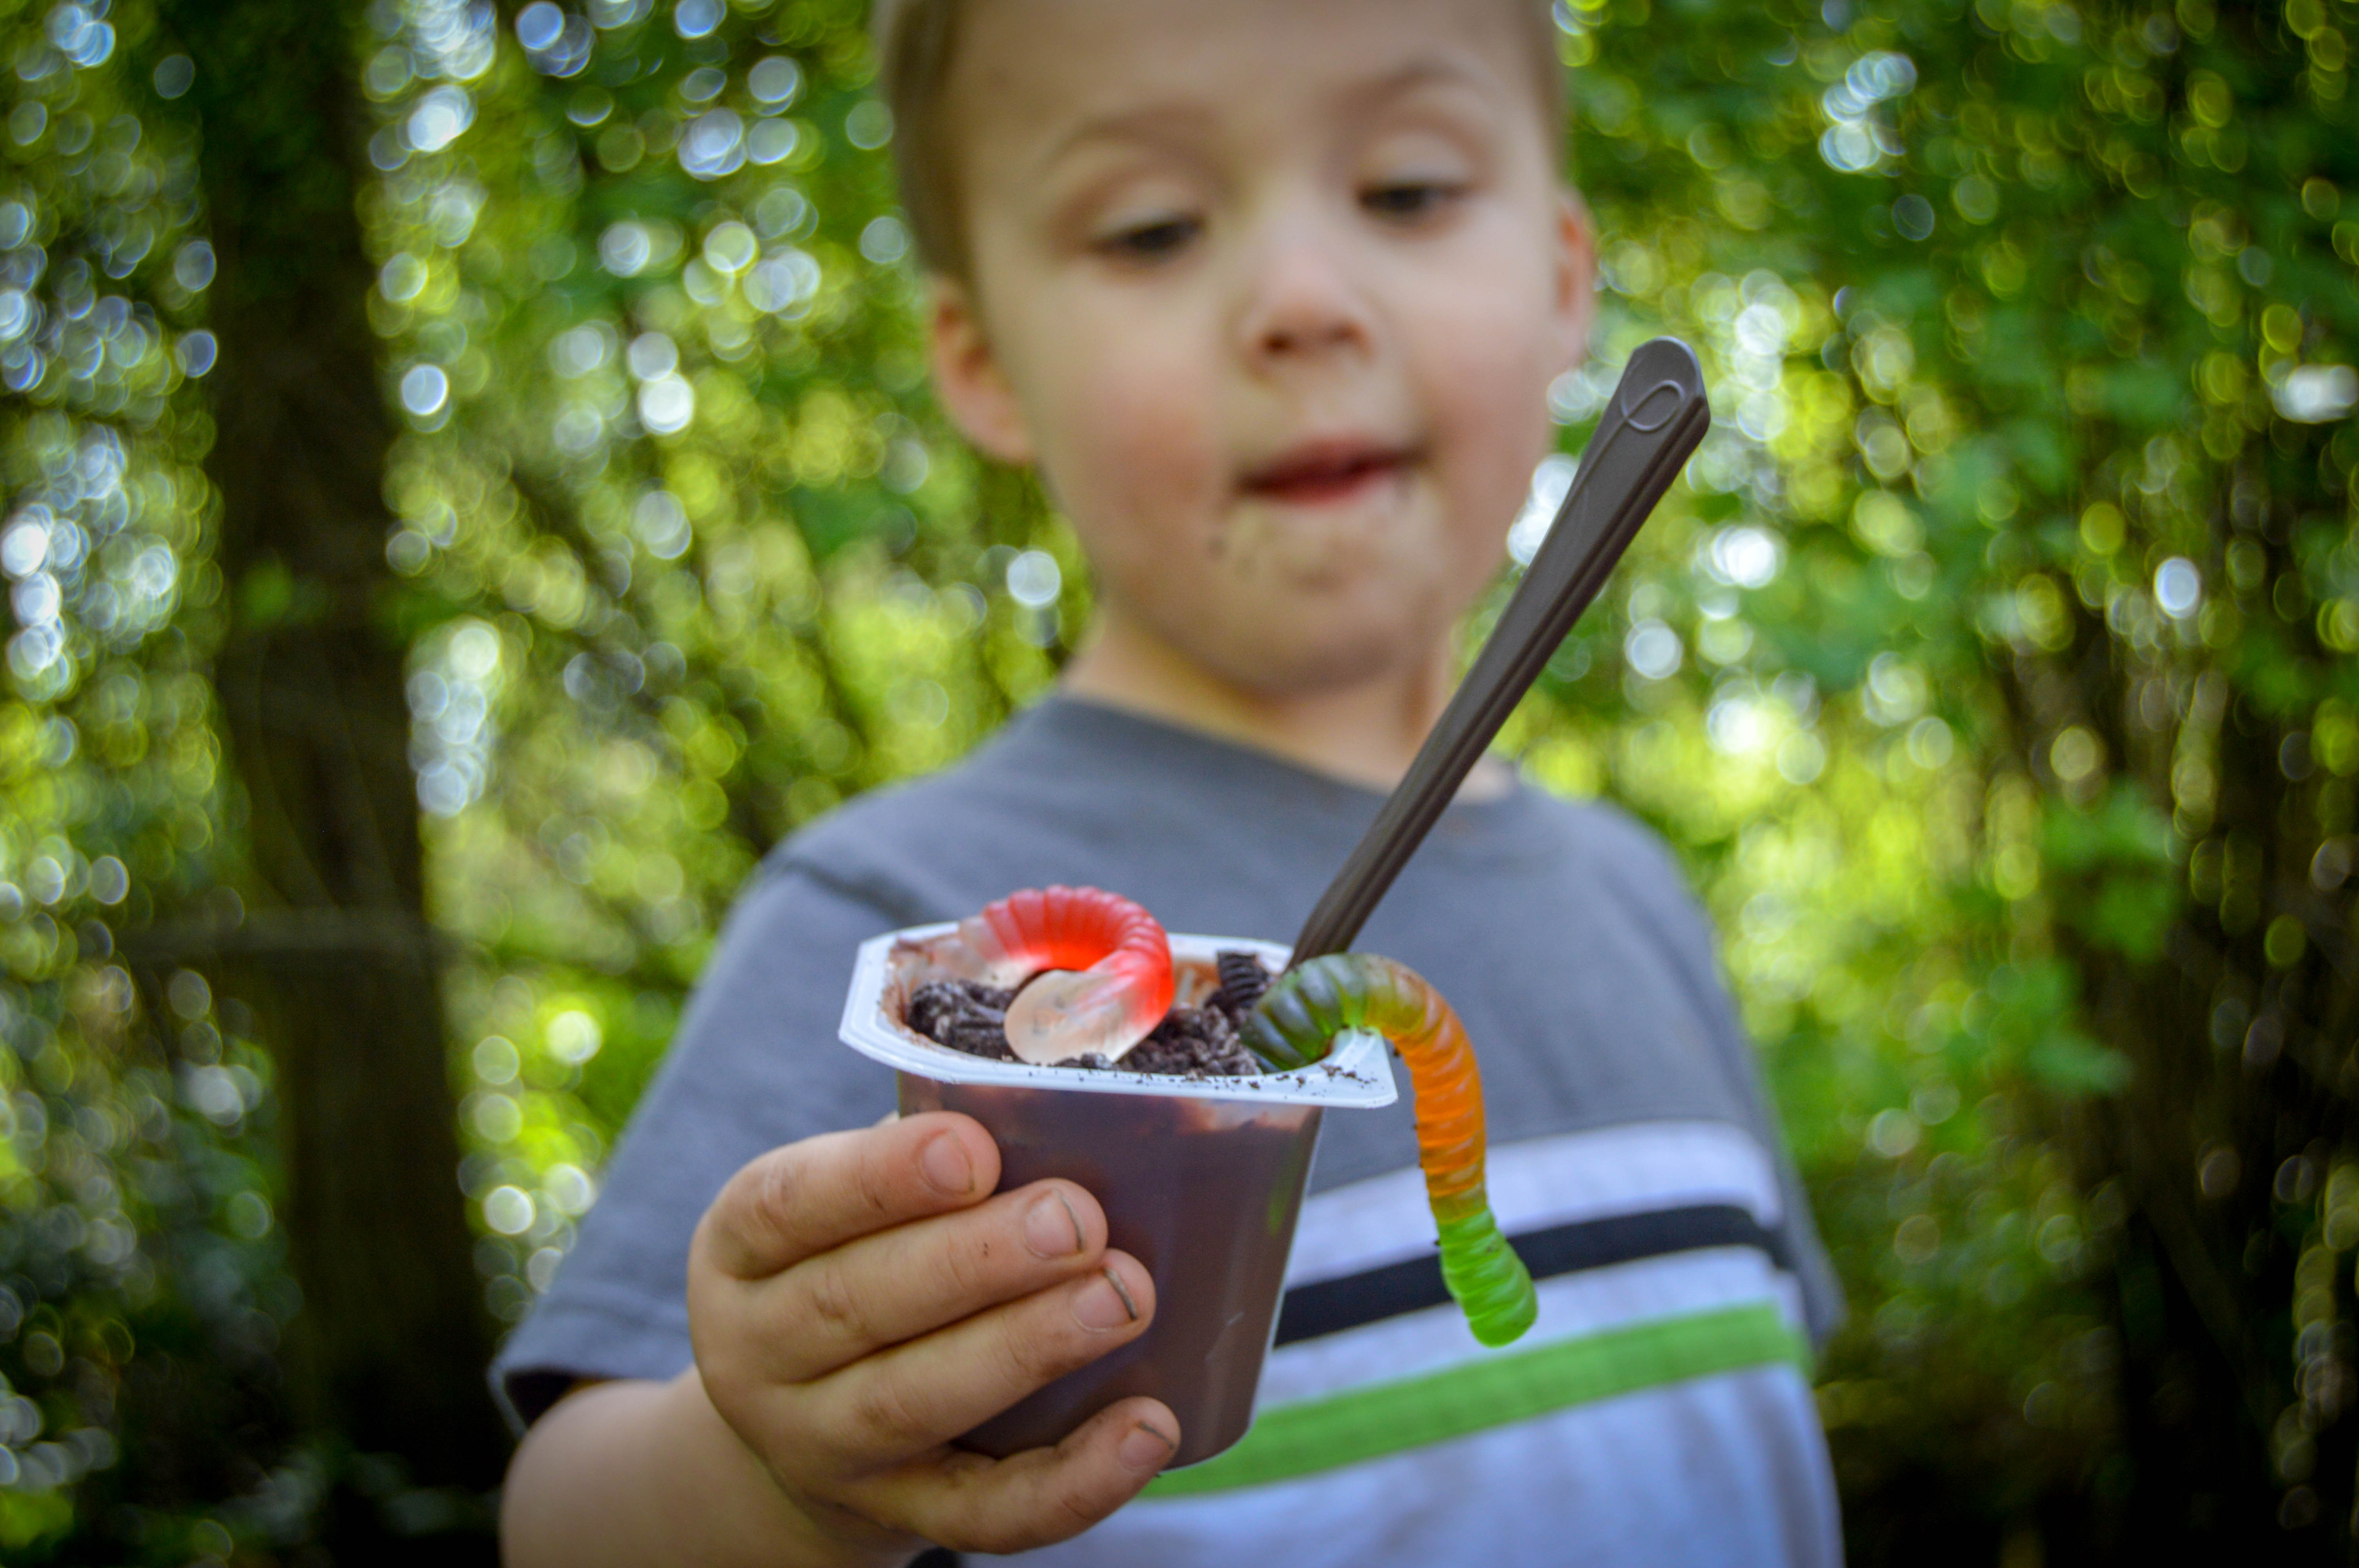 Fun Camping Activities for Toddlers #8 - Make dessert dirt cups